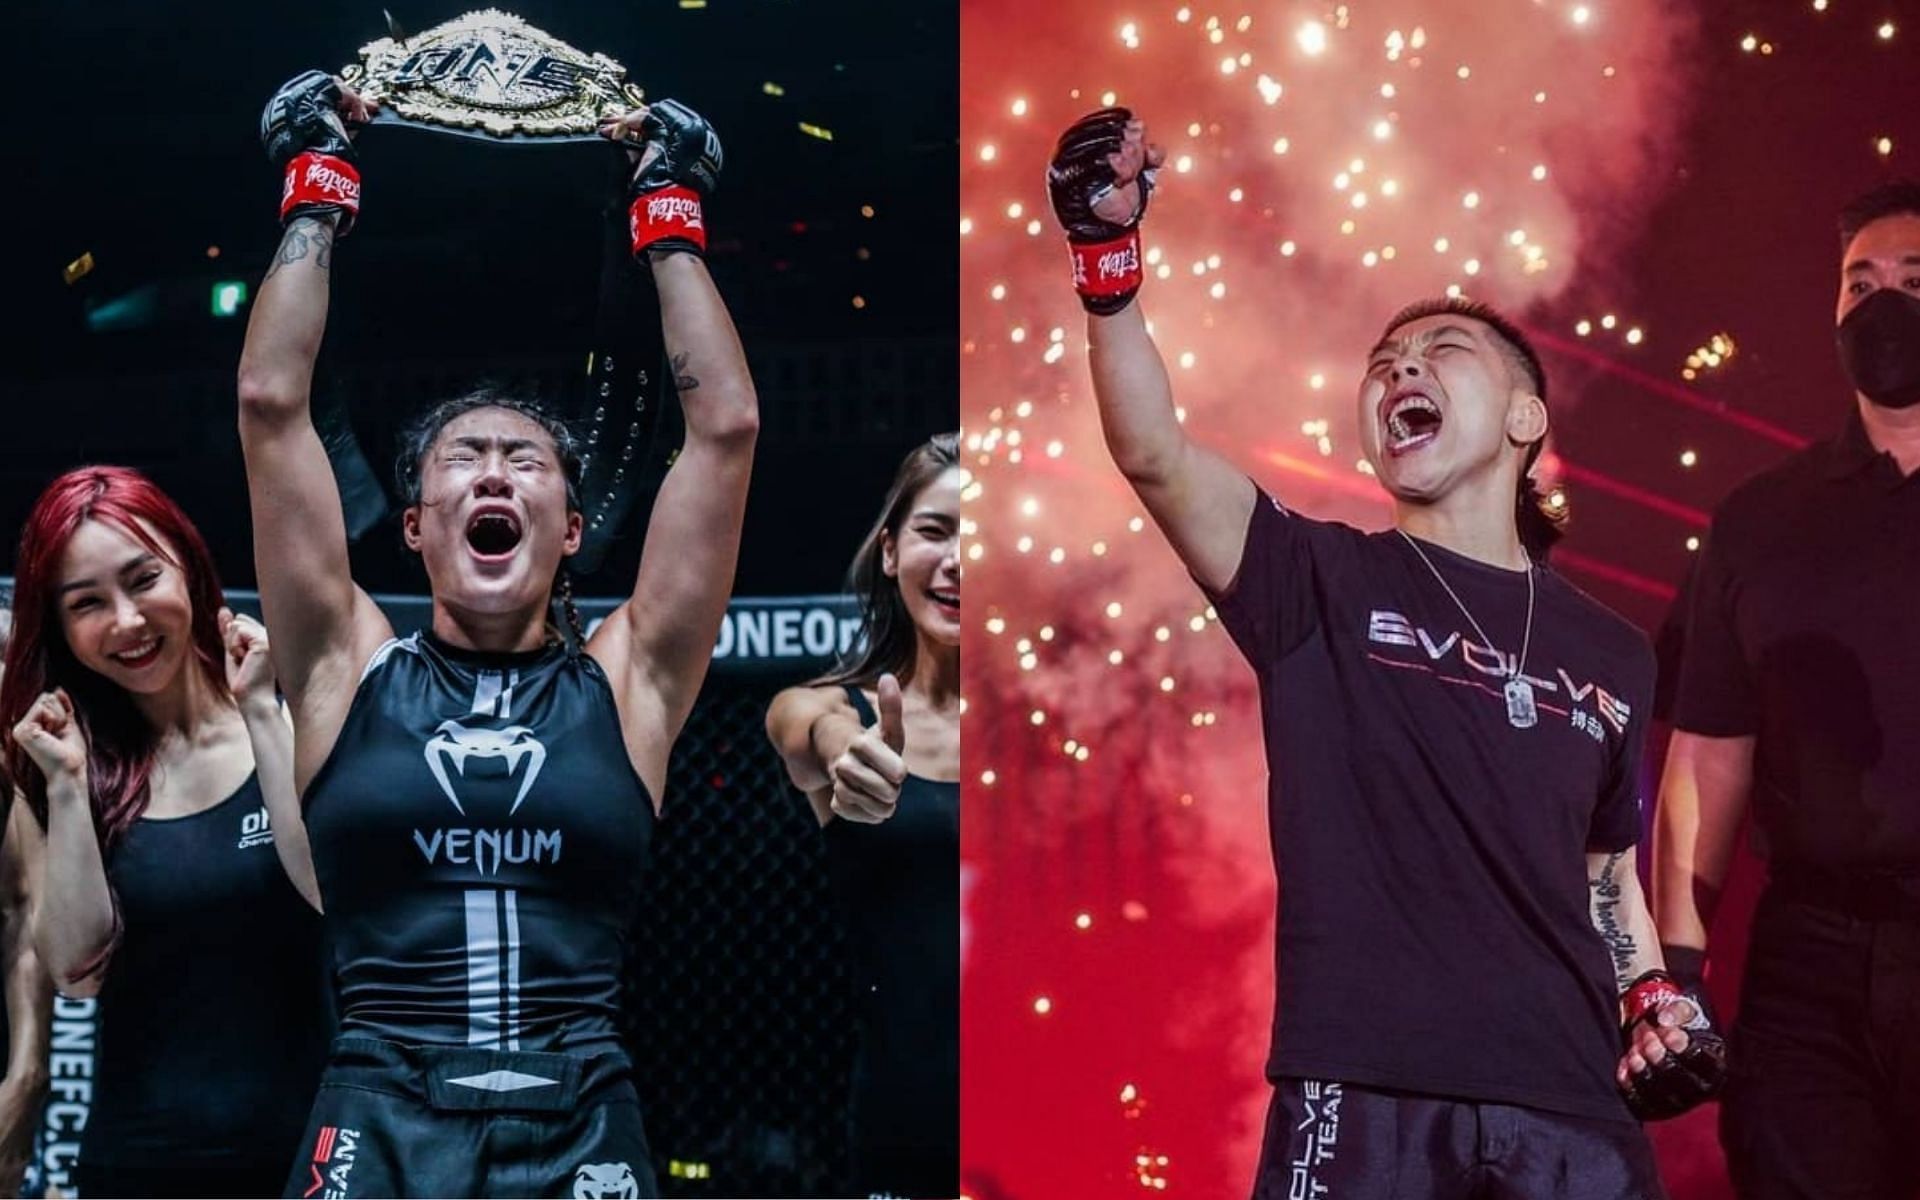 ONE Championship stars Angela Lee and Xiong Jing Nan have unfinished business against each other. [Photos: @angelaleemma, @jingnanxiong on Instagram]